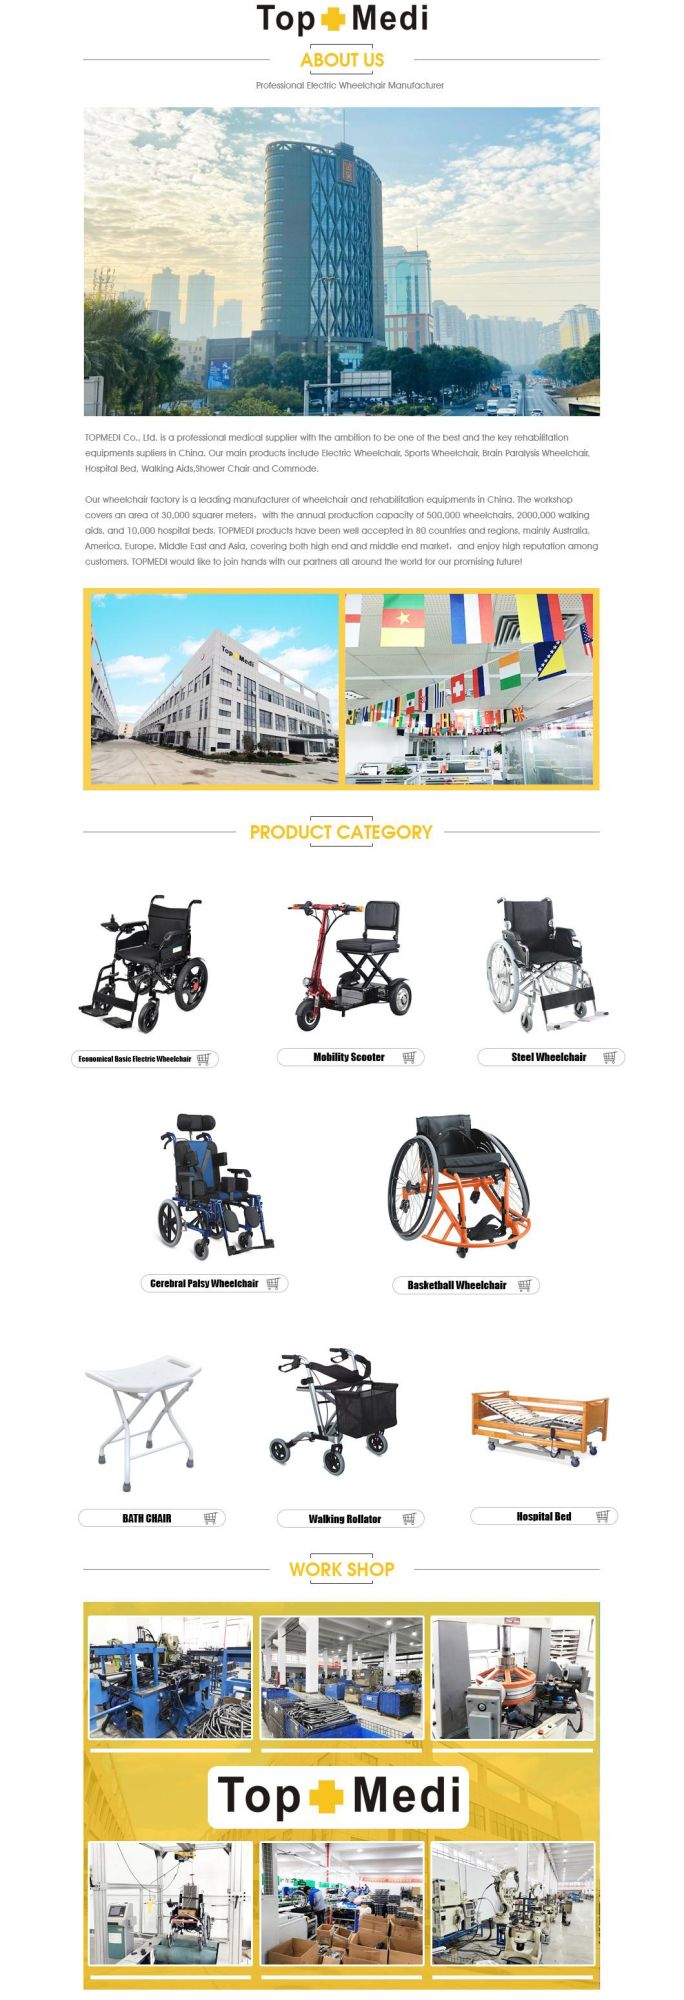 Steel Wheelchair with Elevating Footrest (also can be orthopaedic wheelchair)